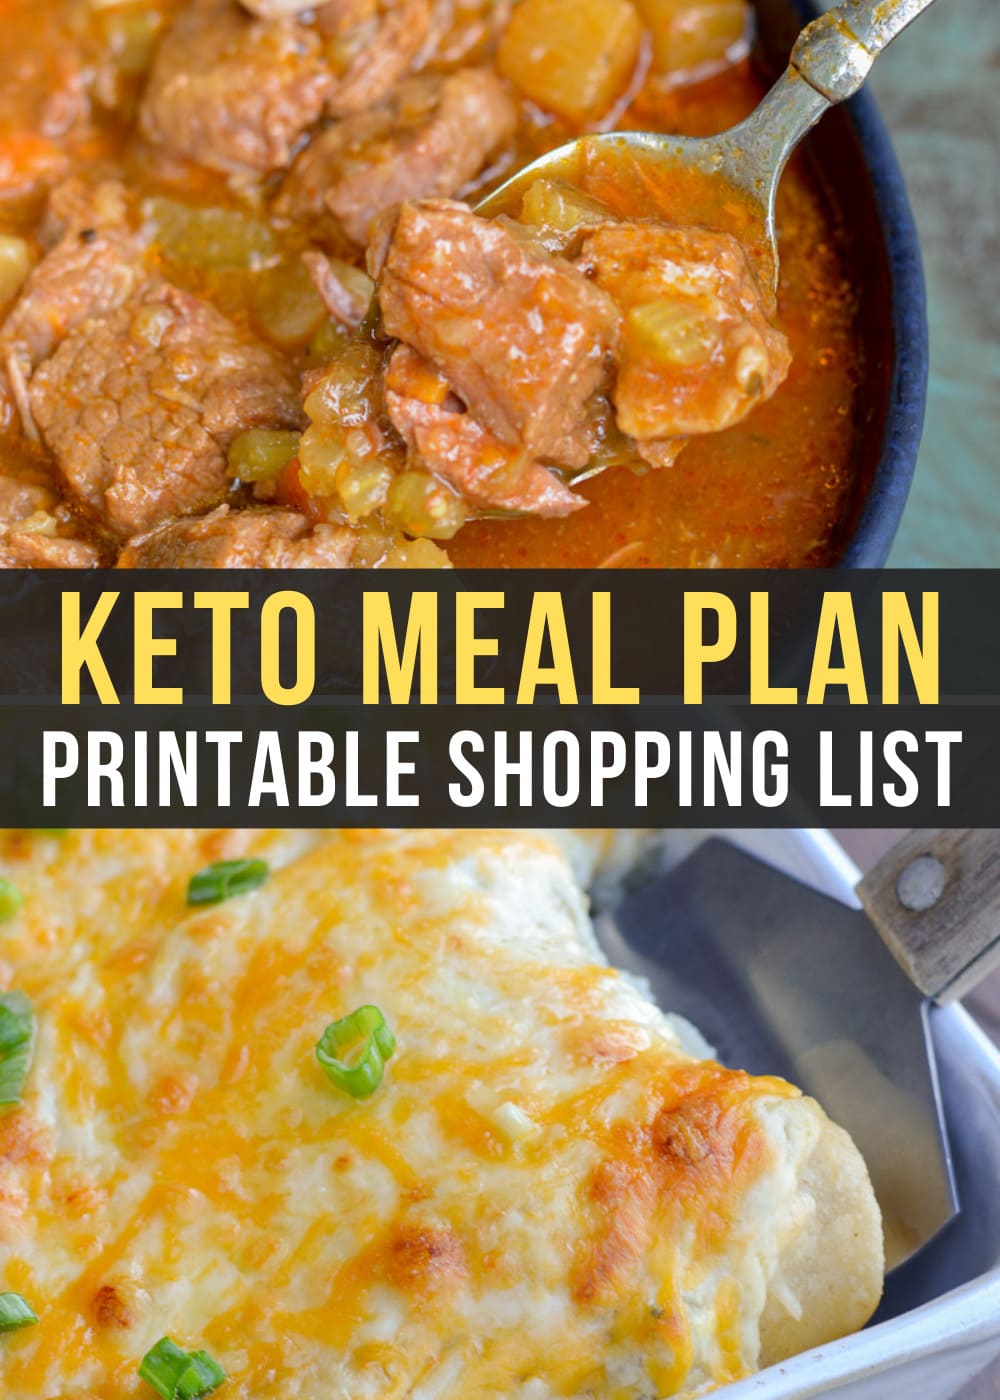 Week 29 Easy Keto Meal Plan includes amazing low carb meals like vegetable beef soup and sour cream enchiladas!